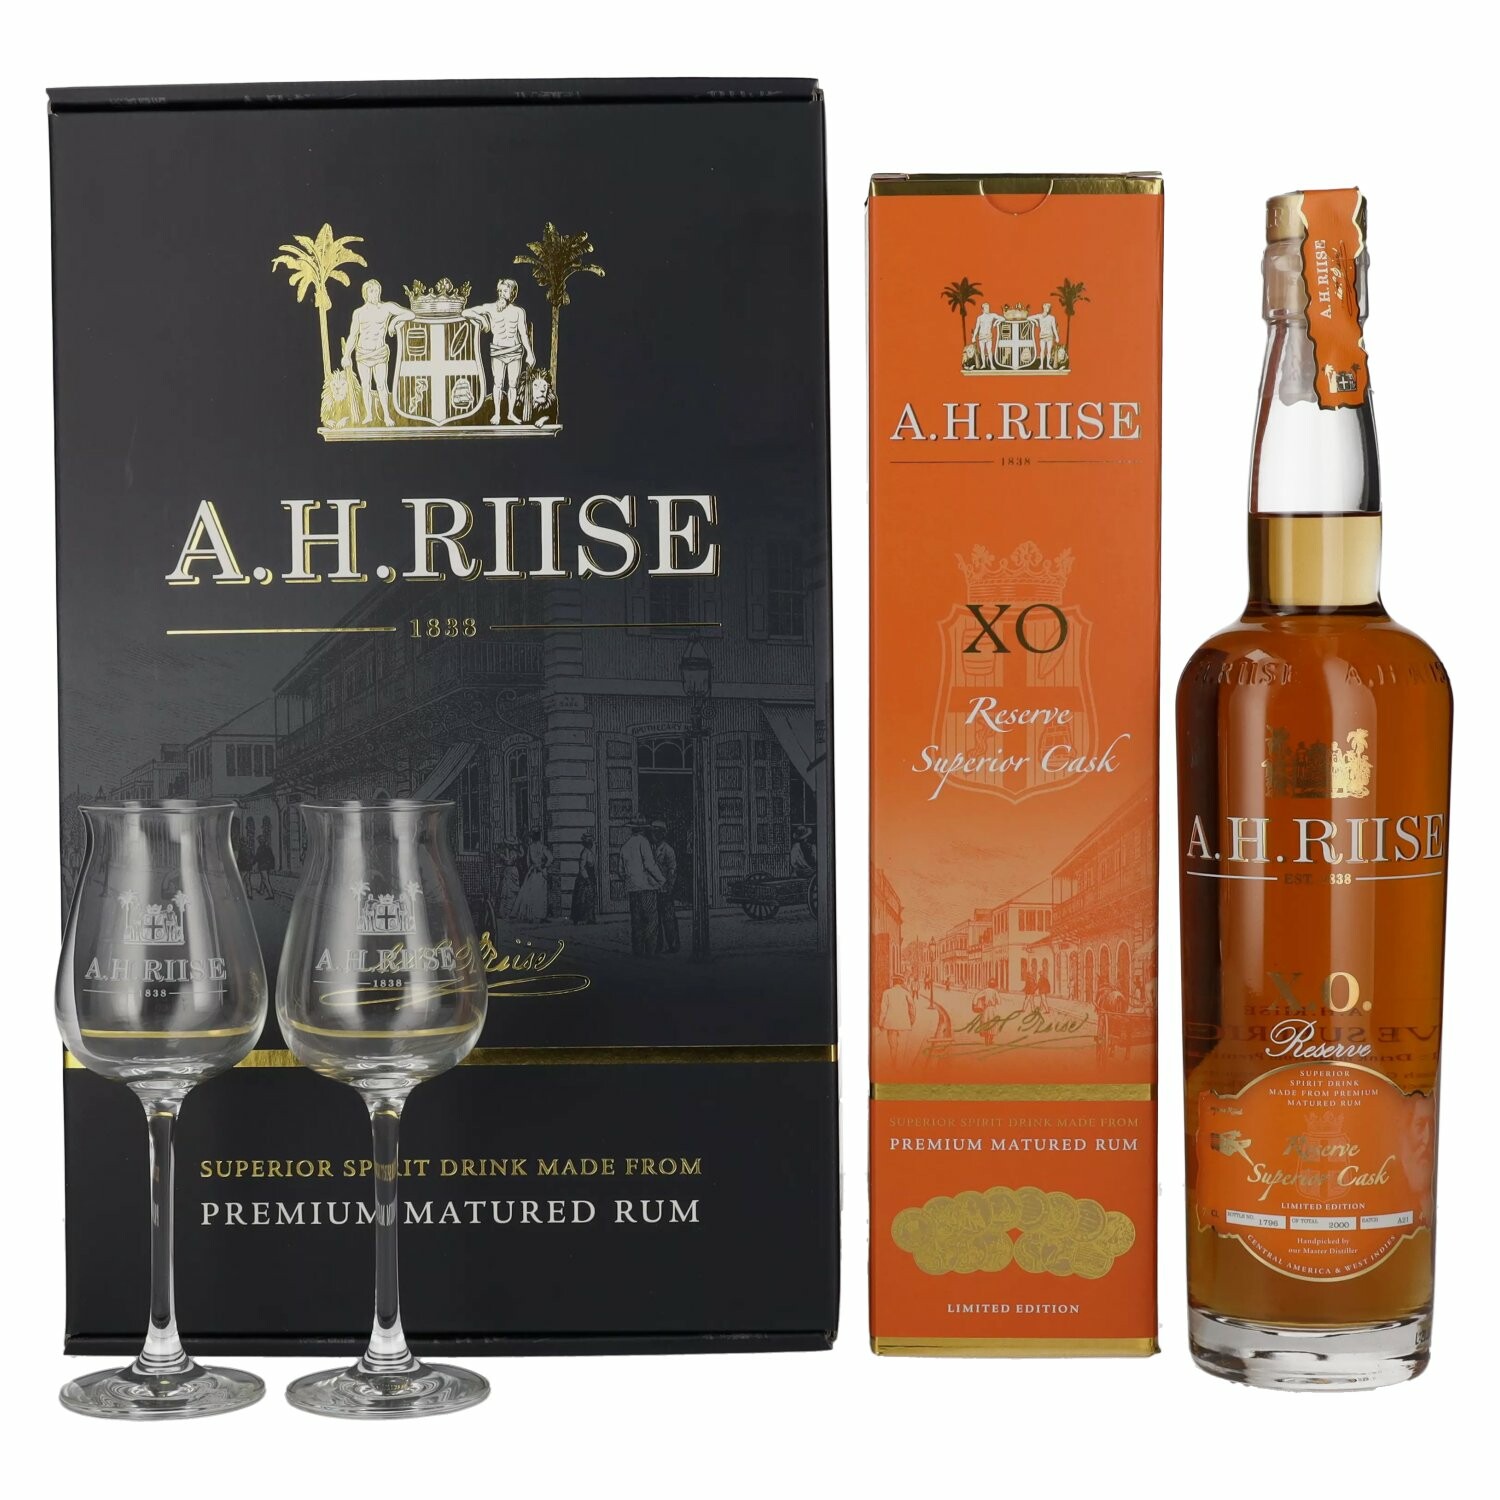 A.H. Riise X.O. Reserve Superior Cask 40% Vol. 0,7l in Giftbox with 2 glasses